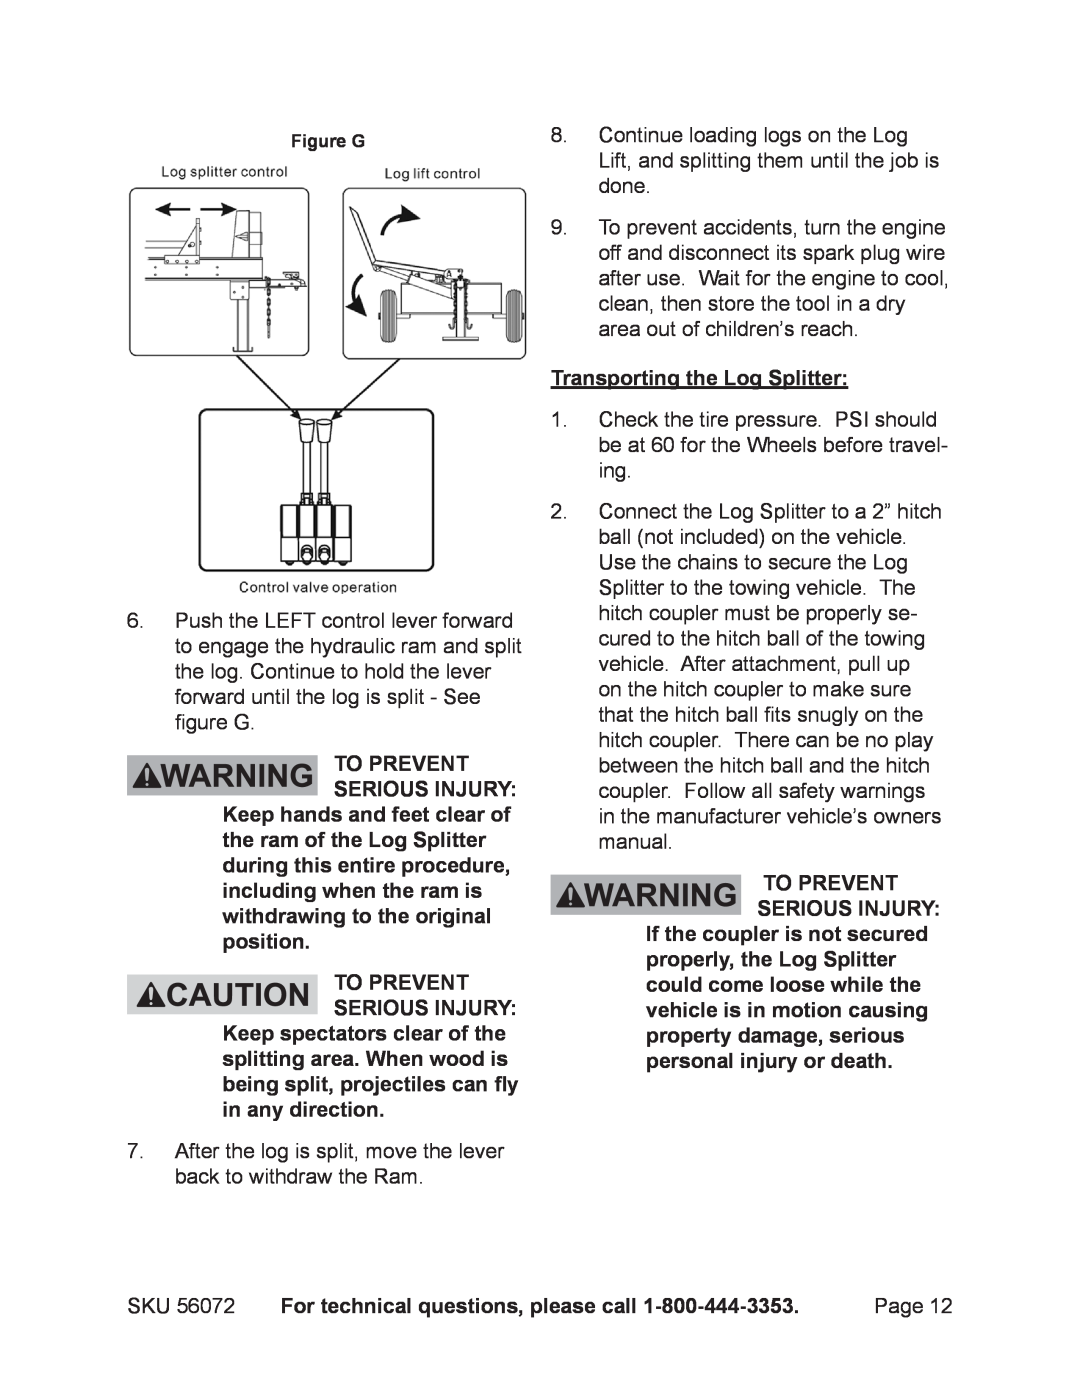 Harbor Freight Tools 56072 manual To prevent serious injury 